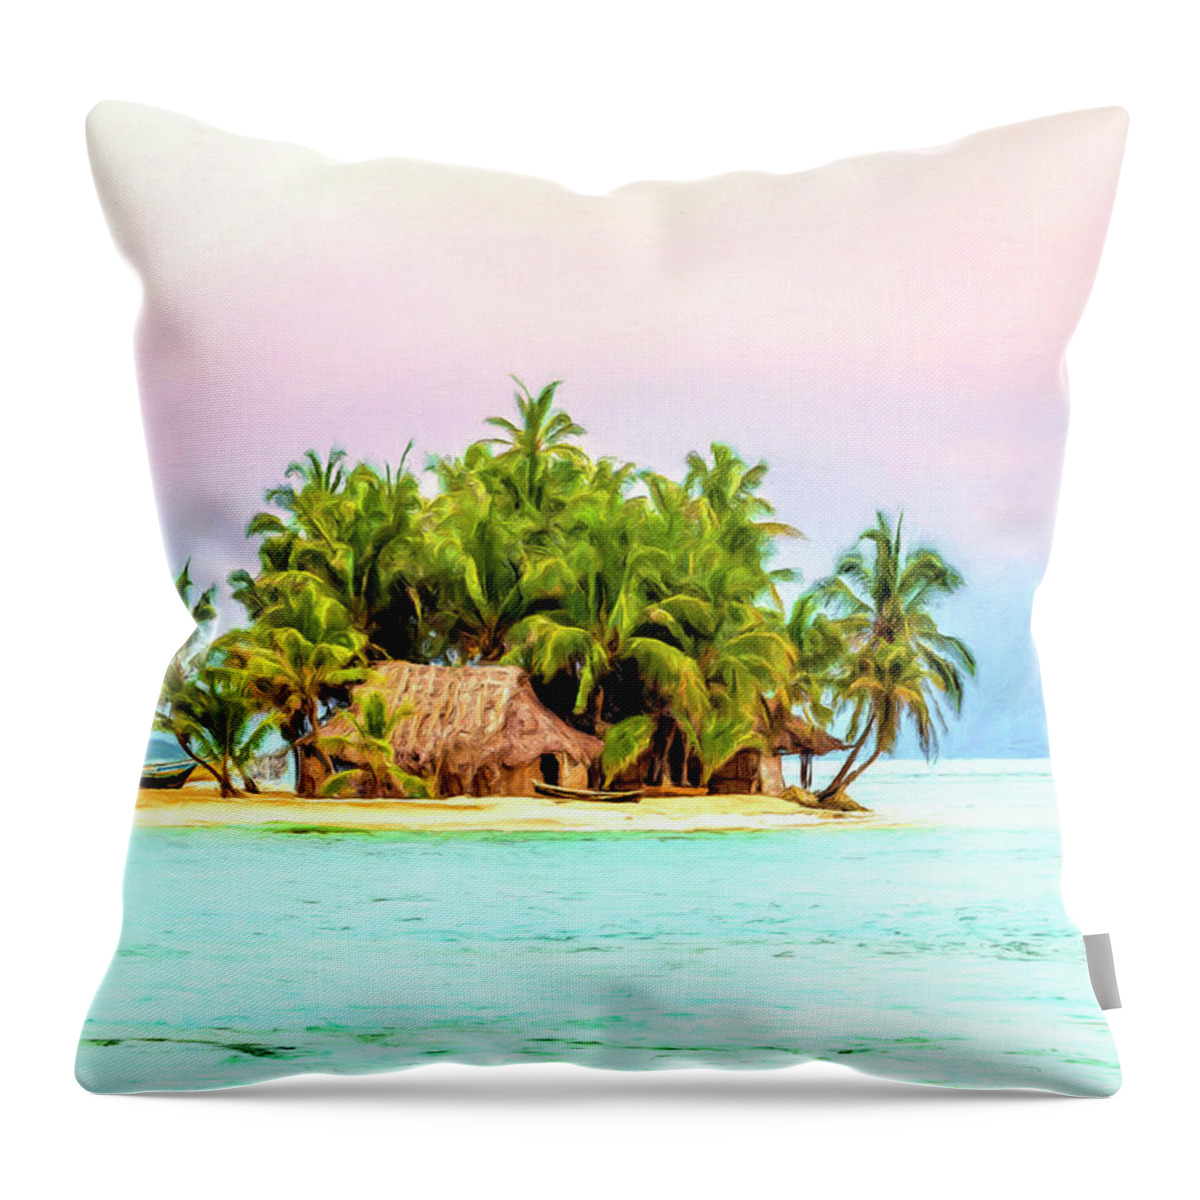 Island Throw Pillow featuring the painting Back To Basics by Dominic Piperata